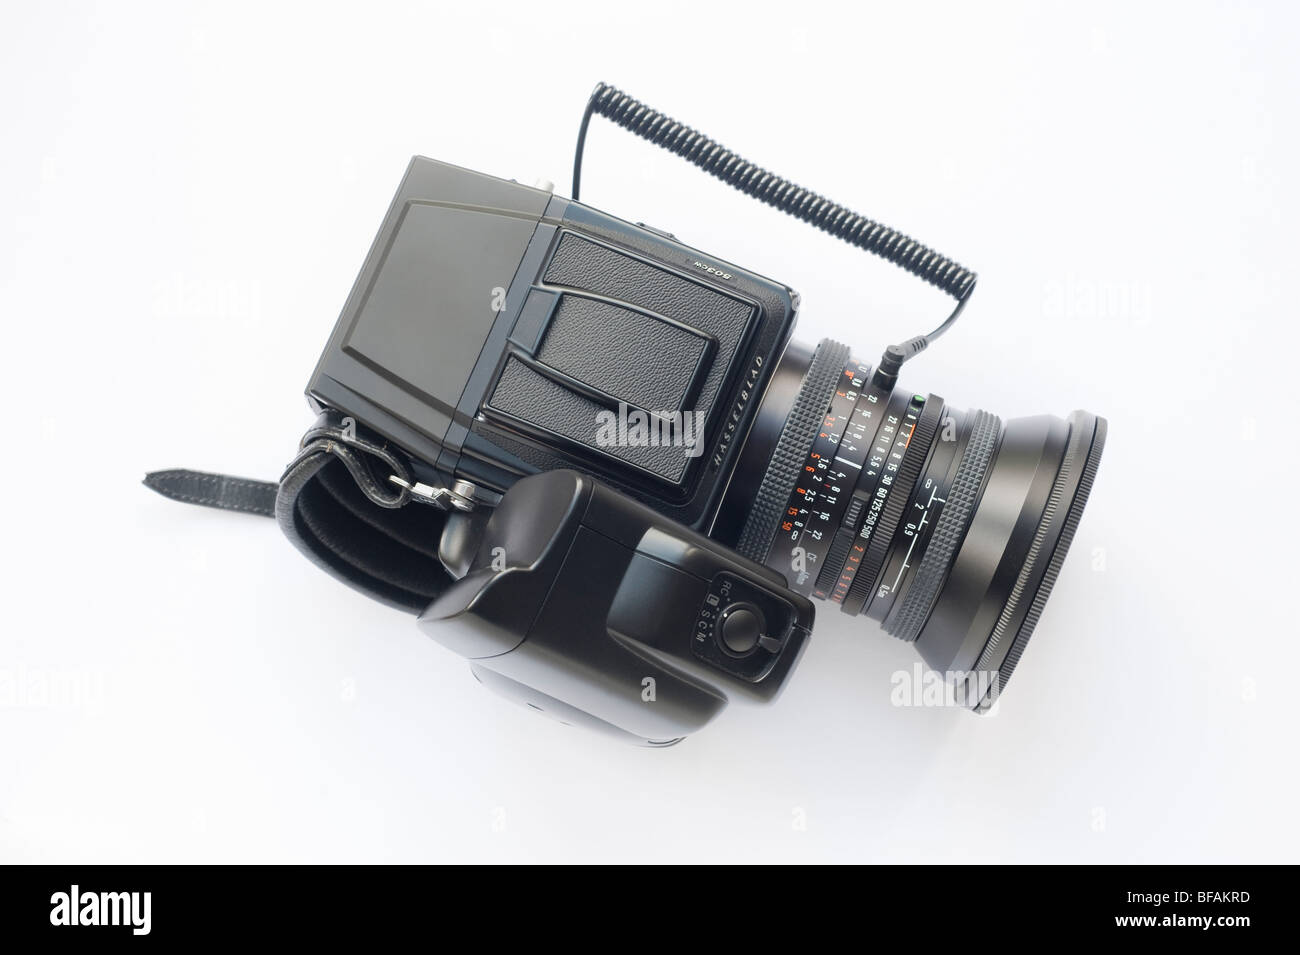 Hasselblad 503cw camera fitted with digital back Stock Photo - Alamy